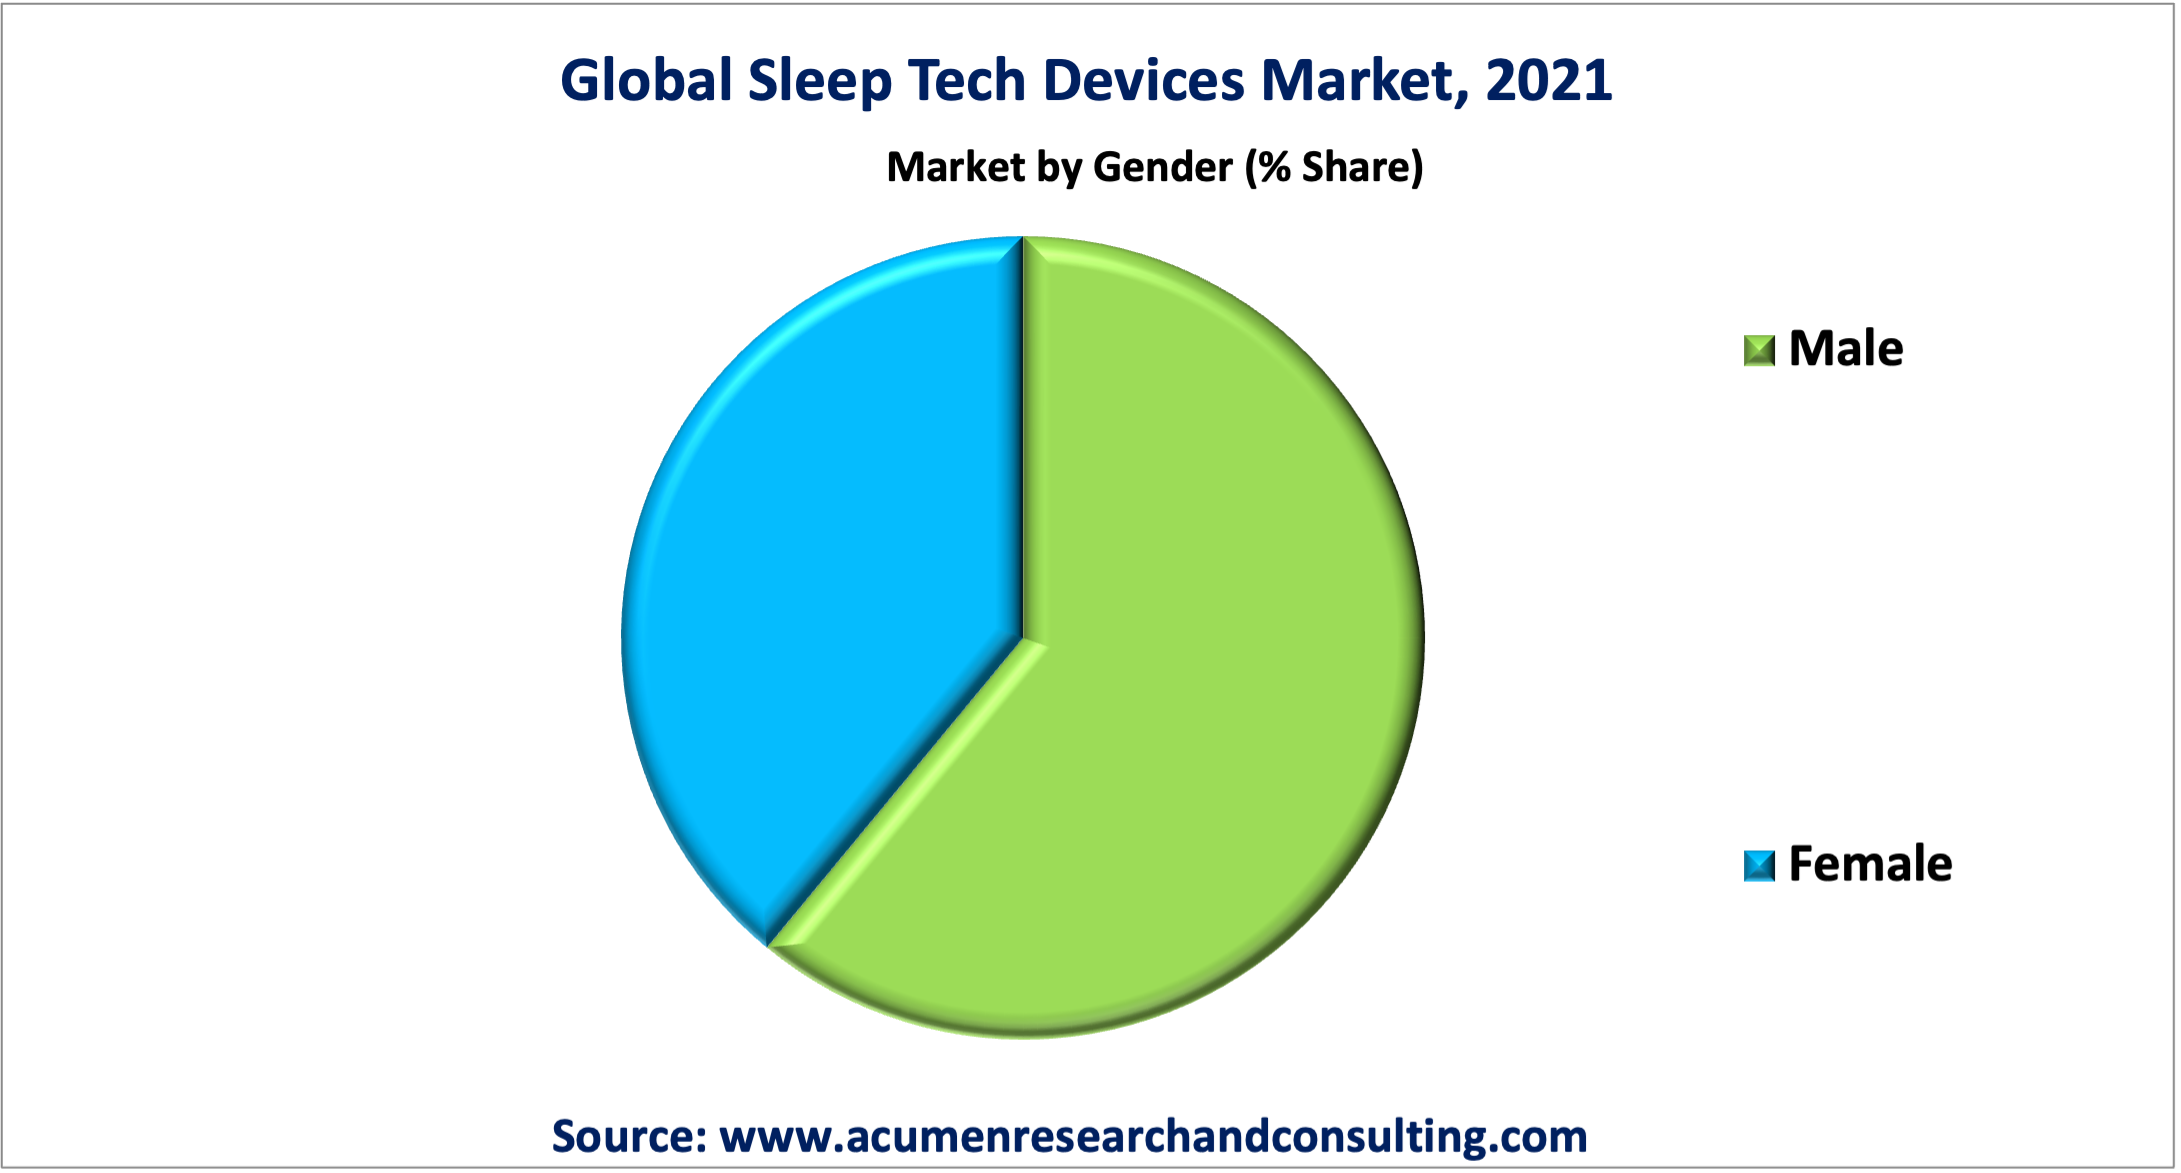 Sleep Tech Devices Market Share was valued at USD 15,407 Million in 2021 and is estimated to reach the value of USD 60,955 Million by 2030, growing at a CAGR of 16.8% from 2022 to 2030.